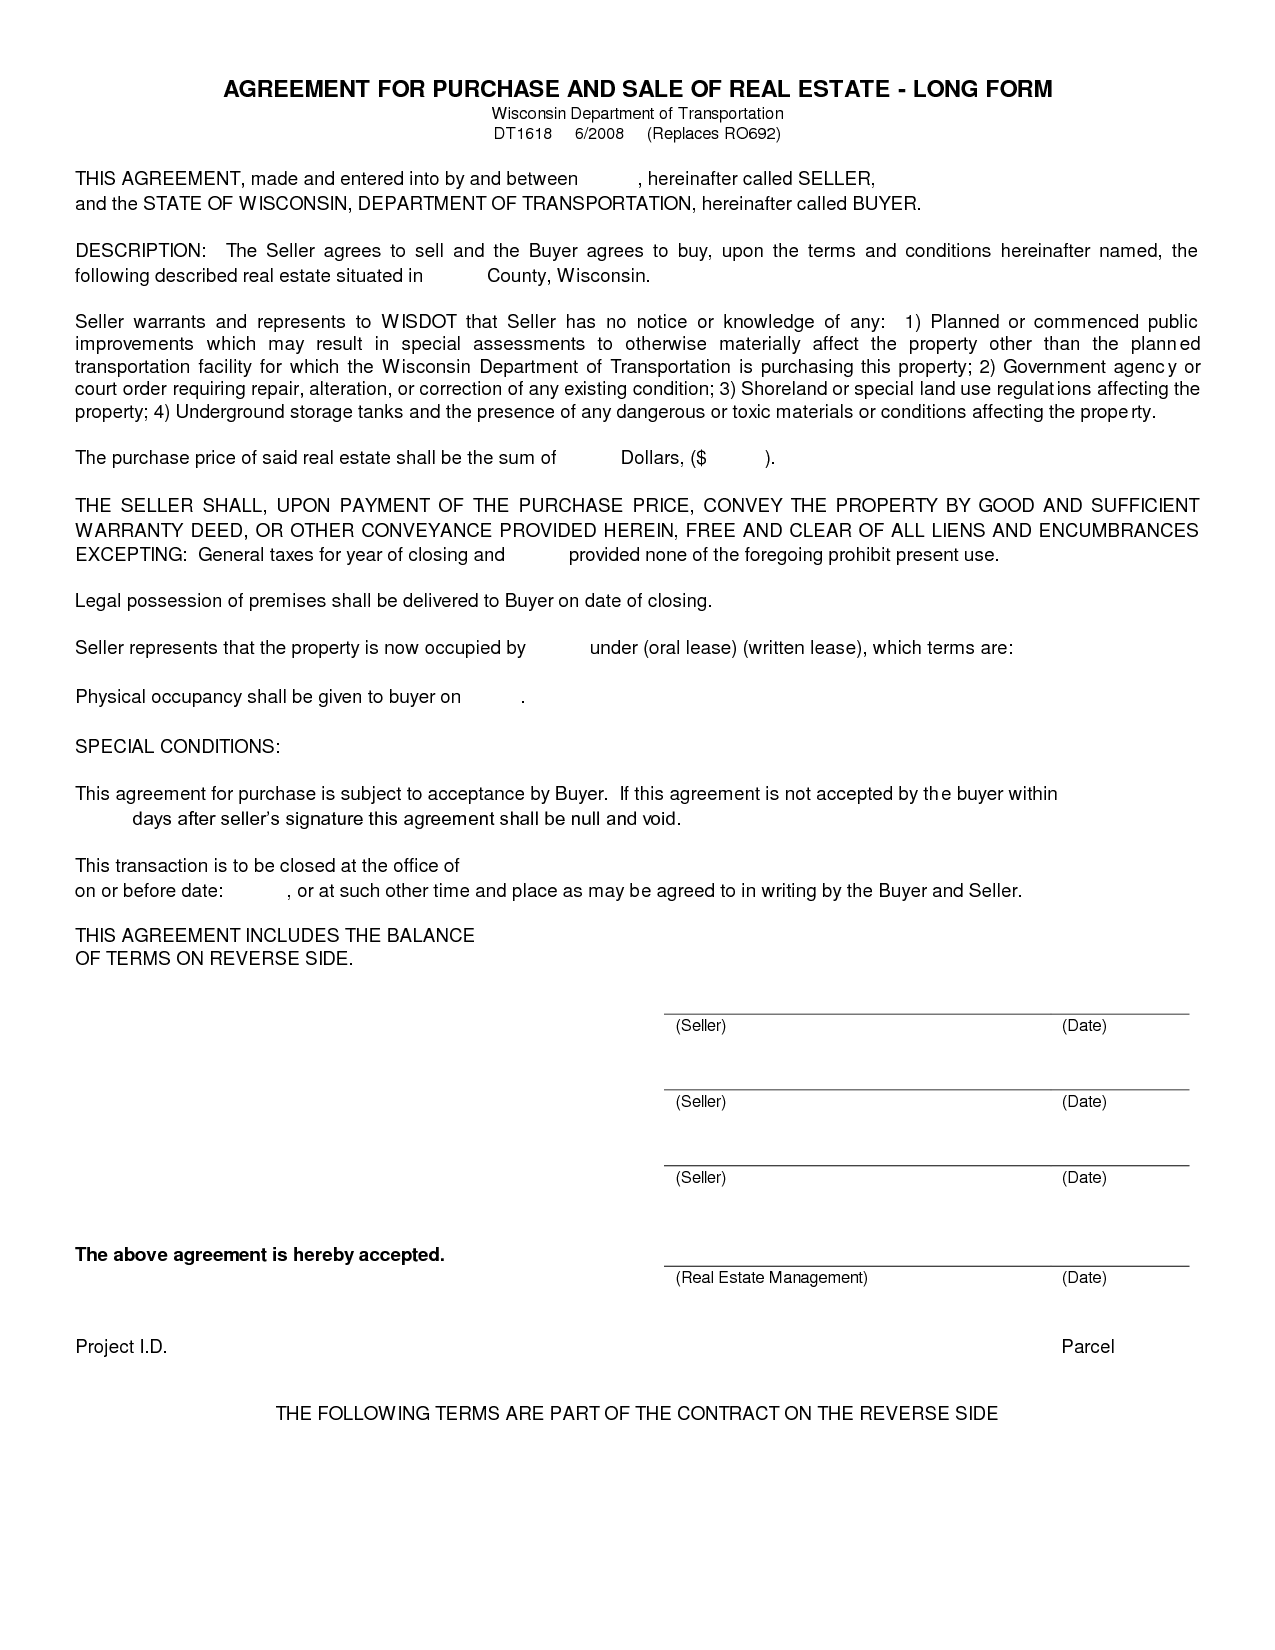 Free Blank Purchase Agreement Form Images To Letter Oft Real 